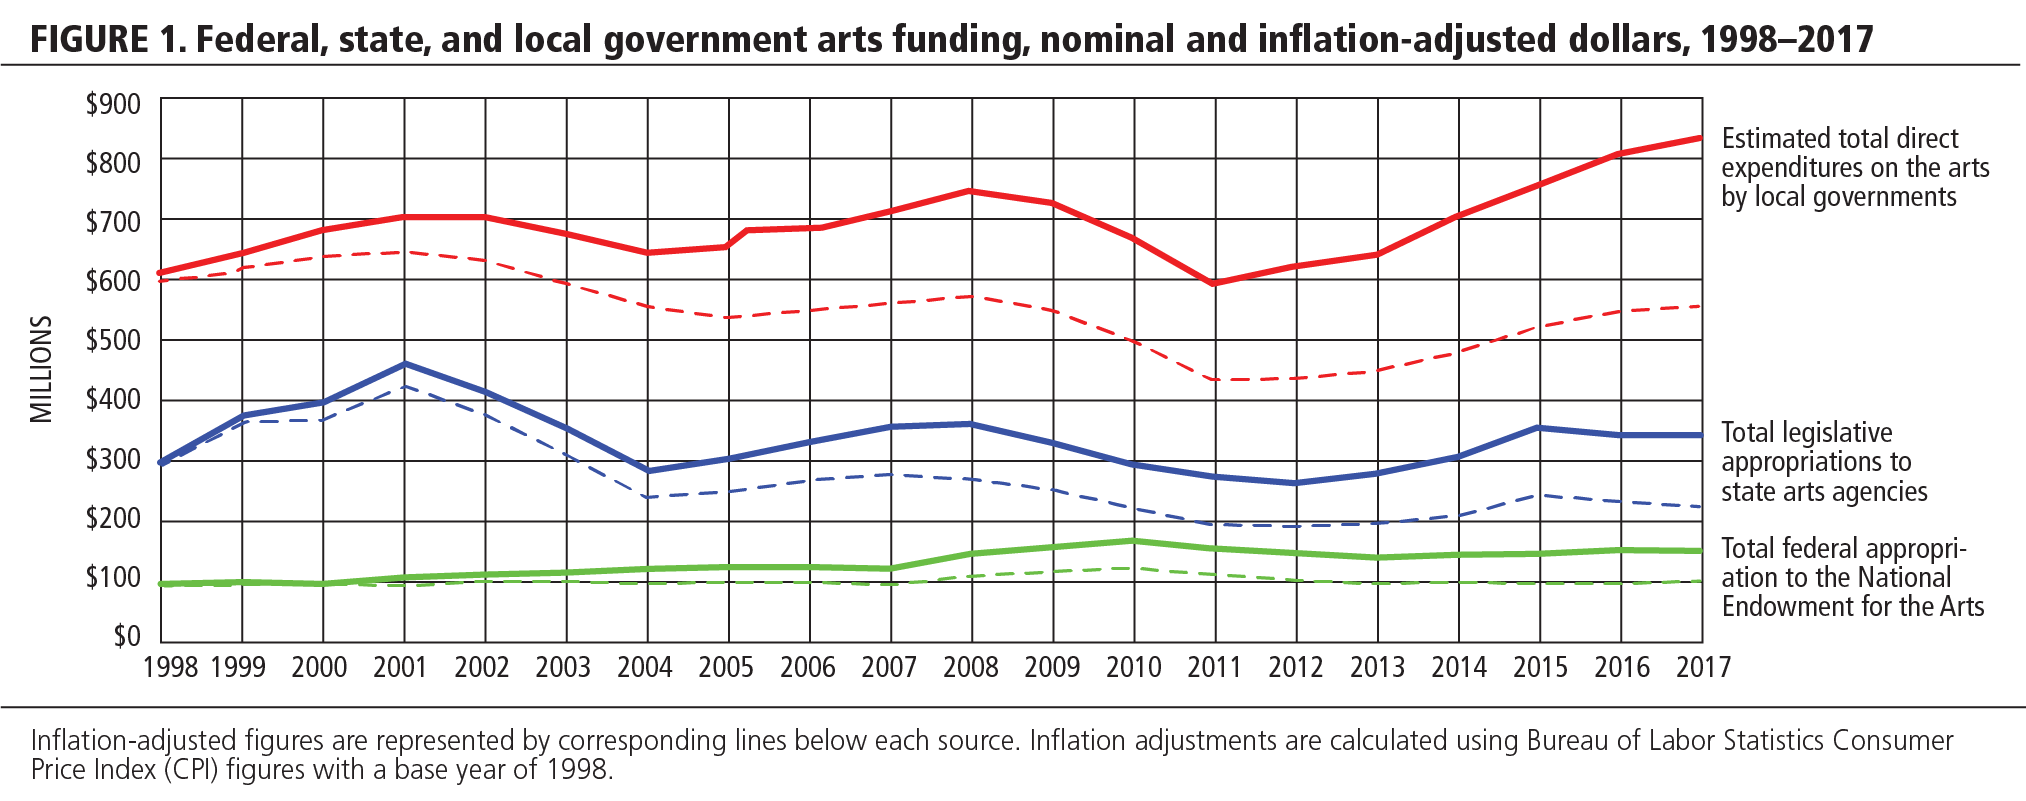 FIGURE 1. Federal, state, and local government arts funding, nominal and inflation-adjusted dollars, 1998-2017